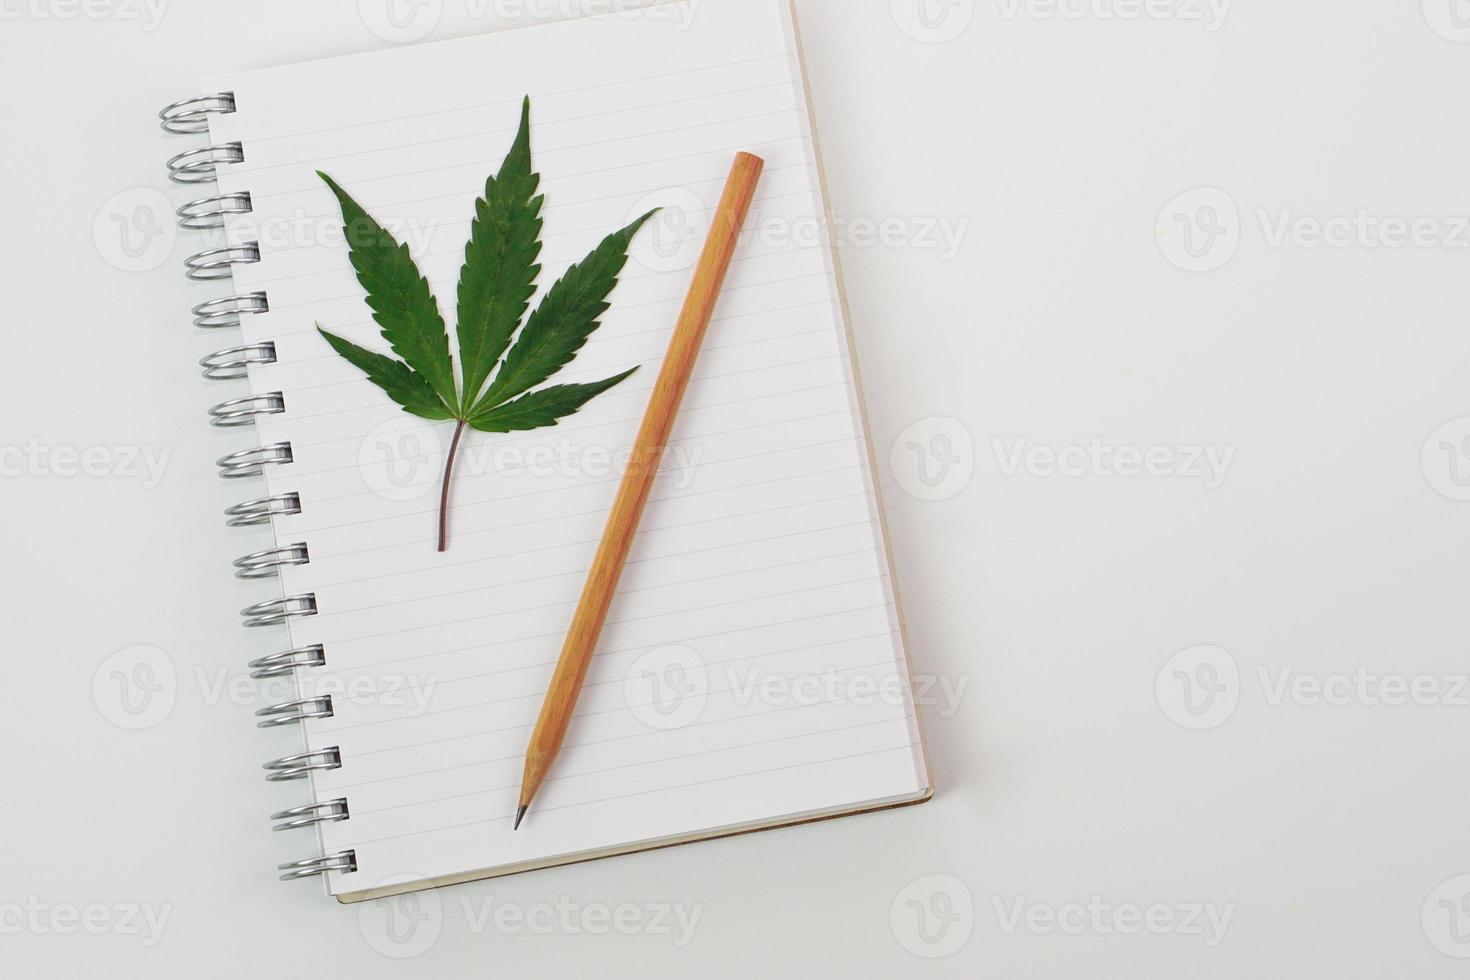 Top view of fresh Cannabis leaf or marijuana leaf placed on book and a pencil. Research, herb and medicine concept. photo